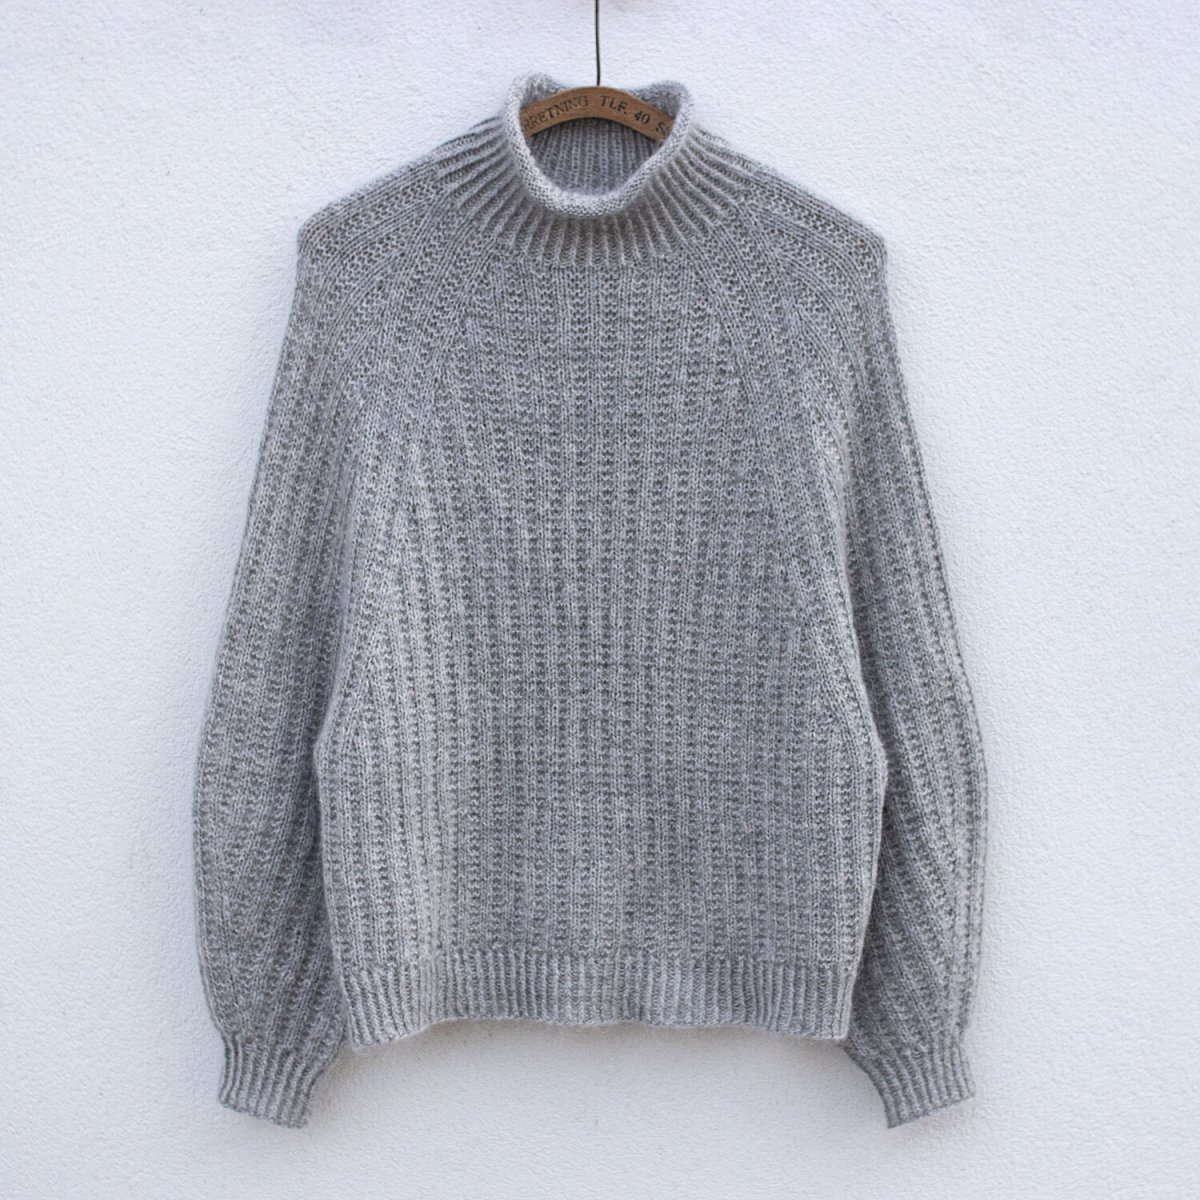 RIBBED JUMPER - English knitting pattern by Anne Ventzel